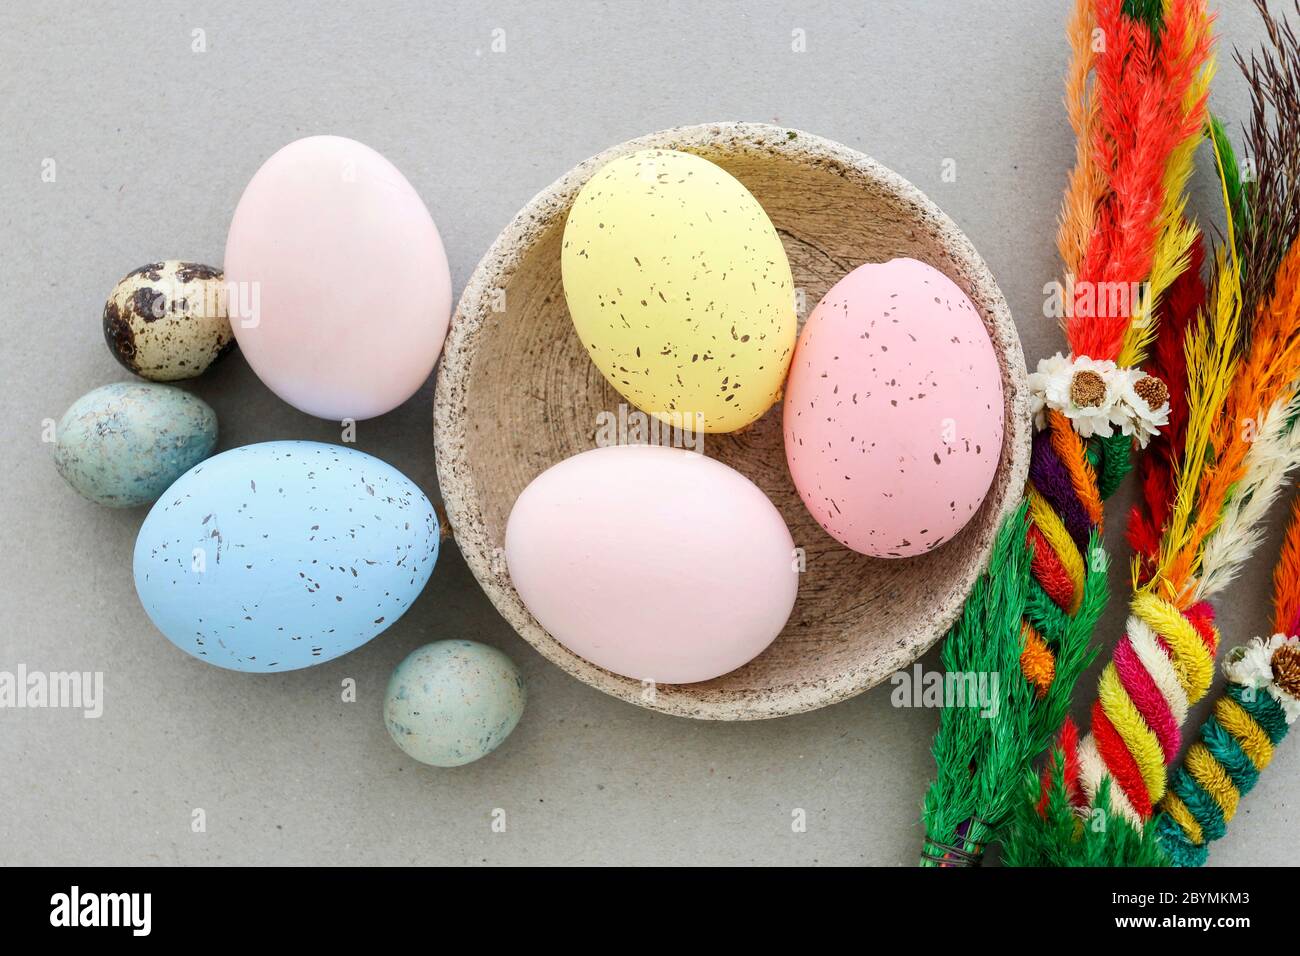 Colorful, painted Easter eggs on a ceramic bowl. Festive decor Stock Photo